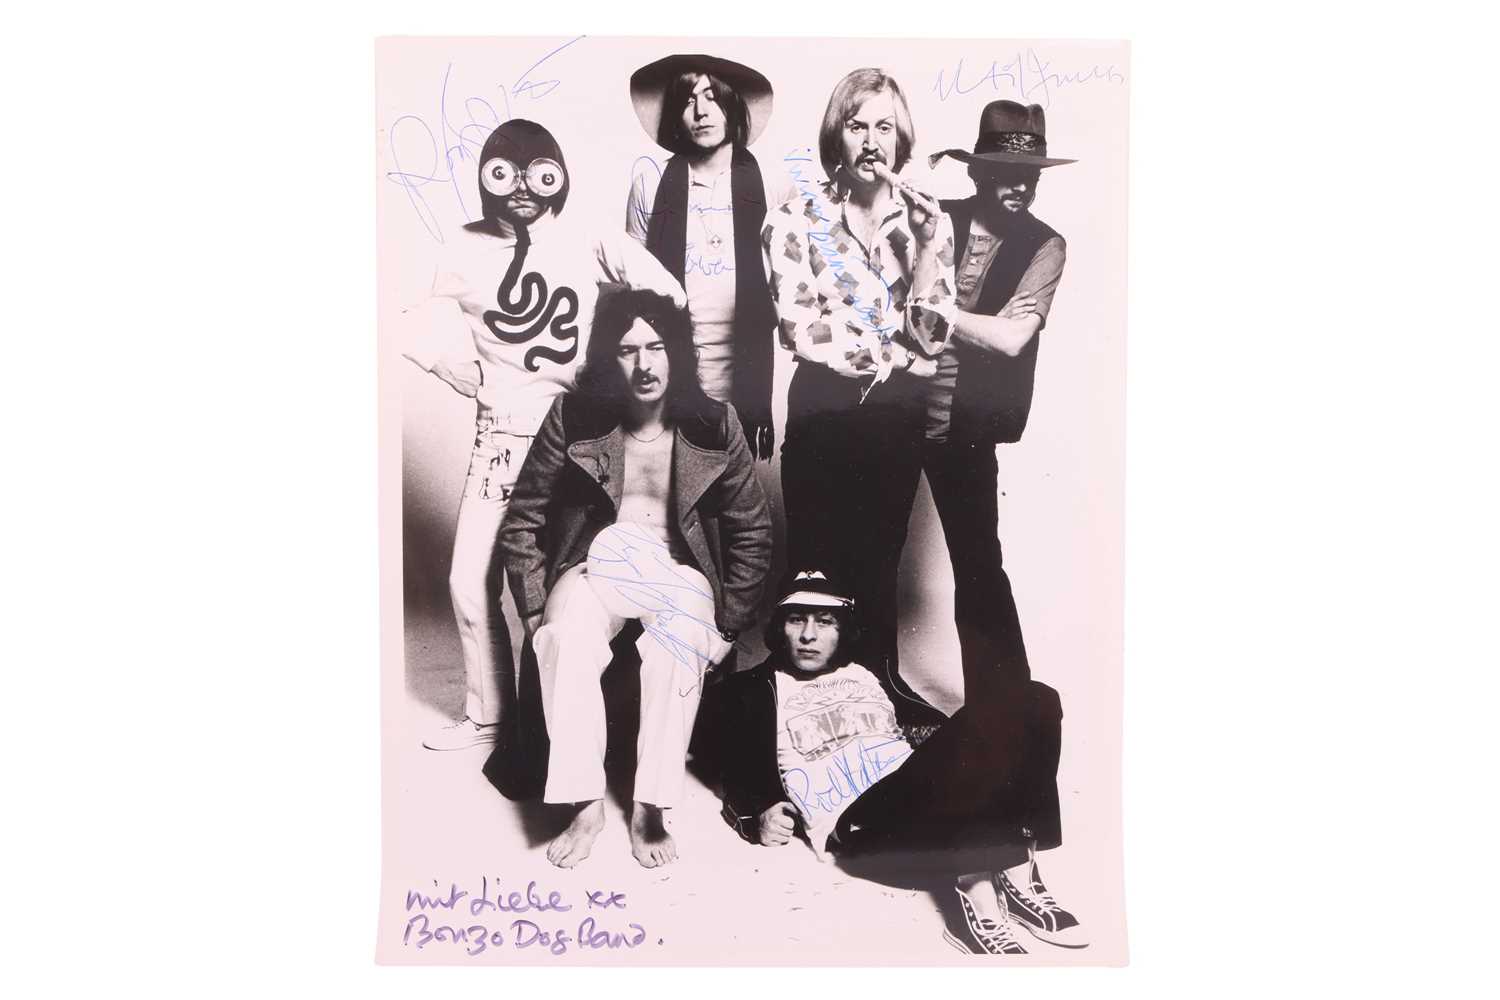 The Bonzo Dog Doo-Dah Band: a fully signed black and white photograph of the band, with the signatur